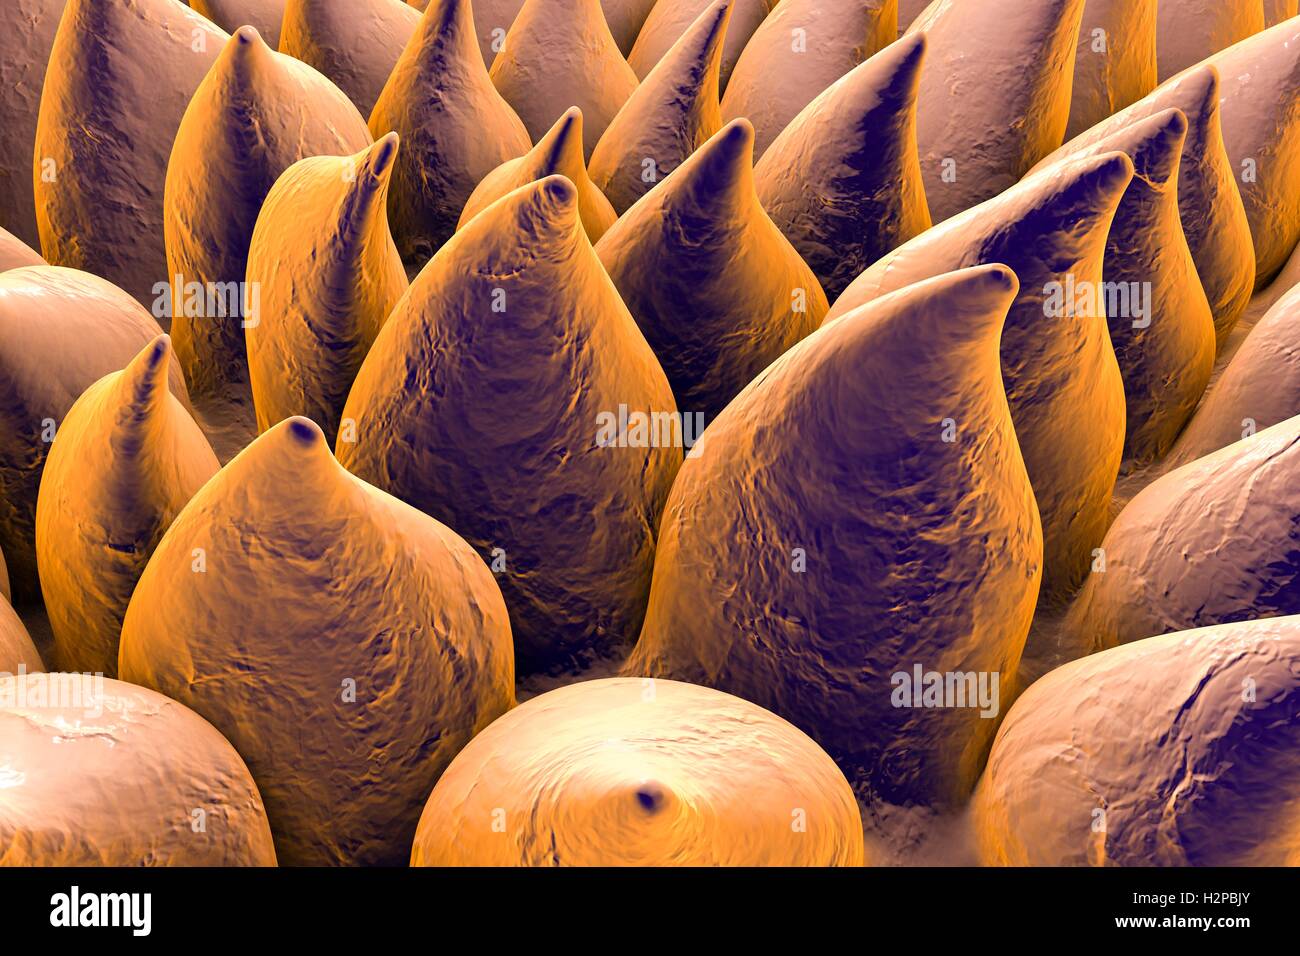 Filiform papillae (cone-shaped) on the surface of the tongue. Filiform papillae contain nerve endings that transmit tactile (touch) information to the brain. Stock Photo